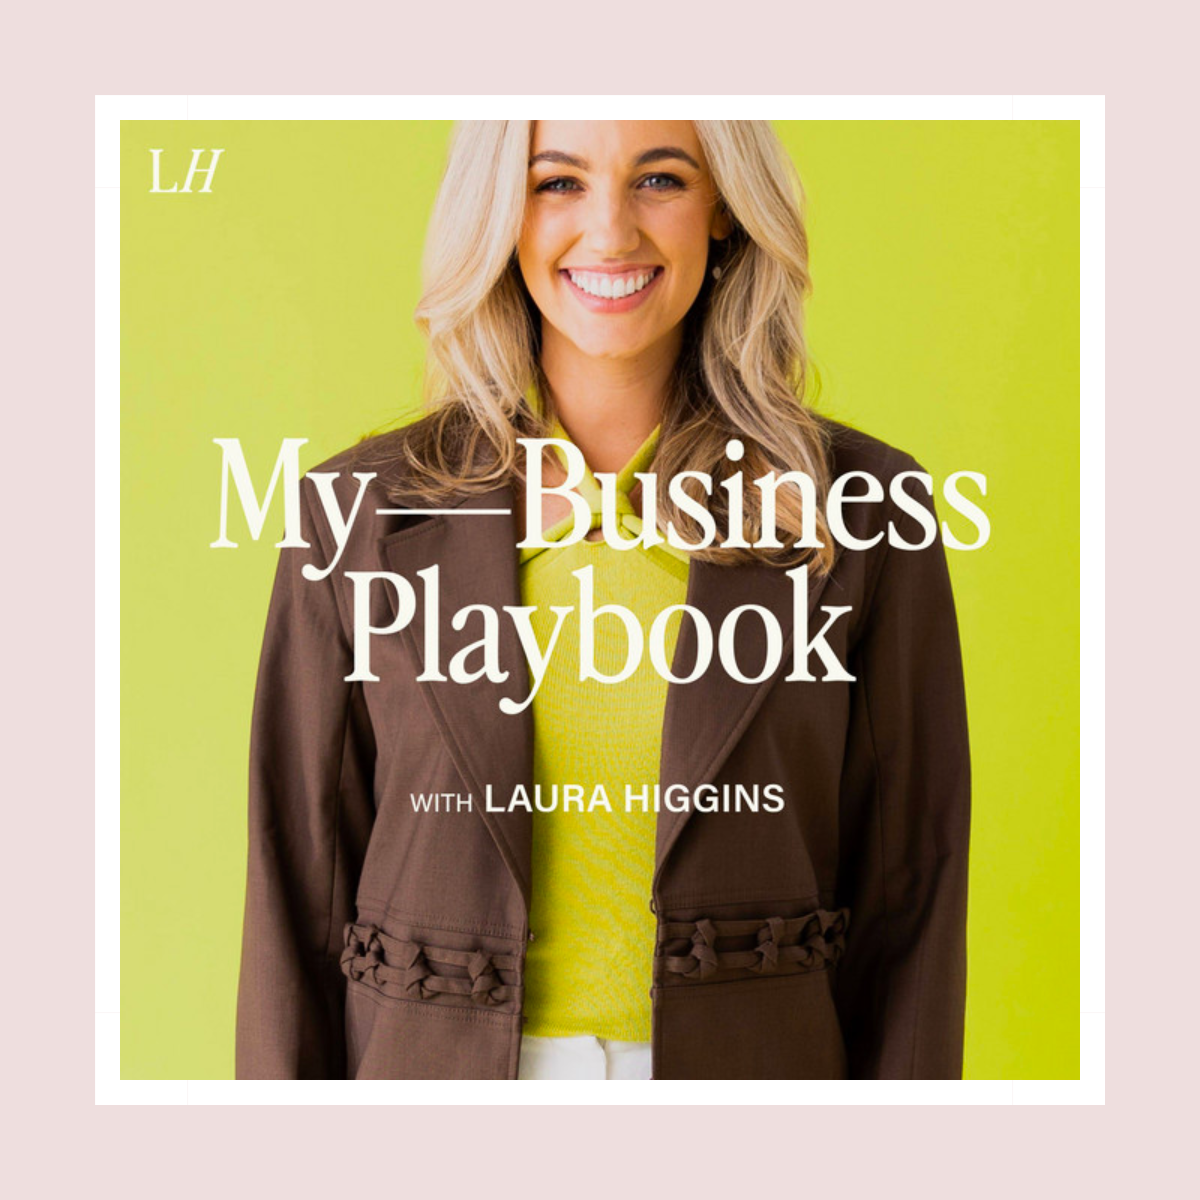 The Mys Business Playbook podcast brand image.